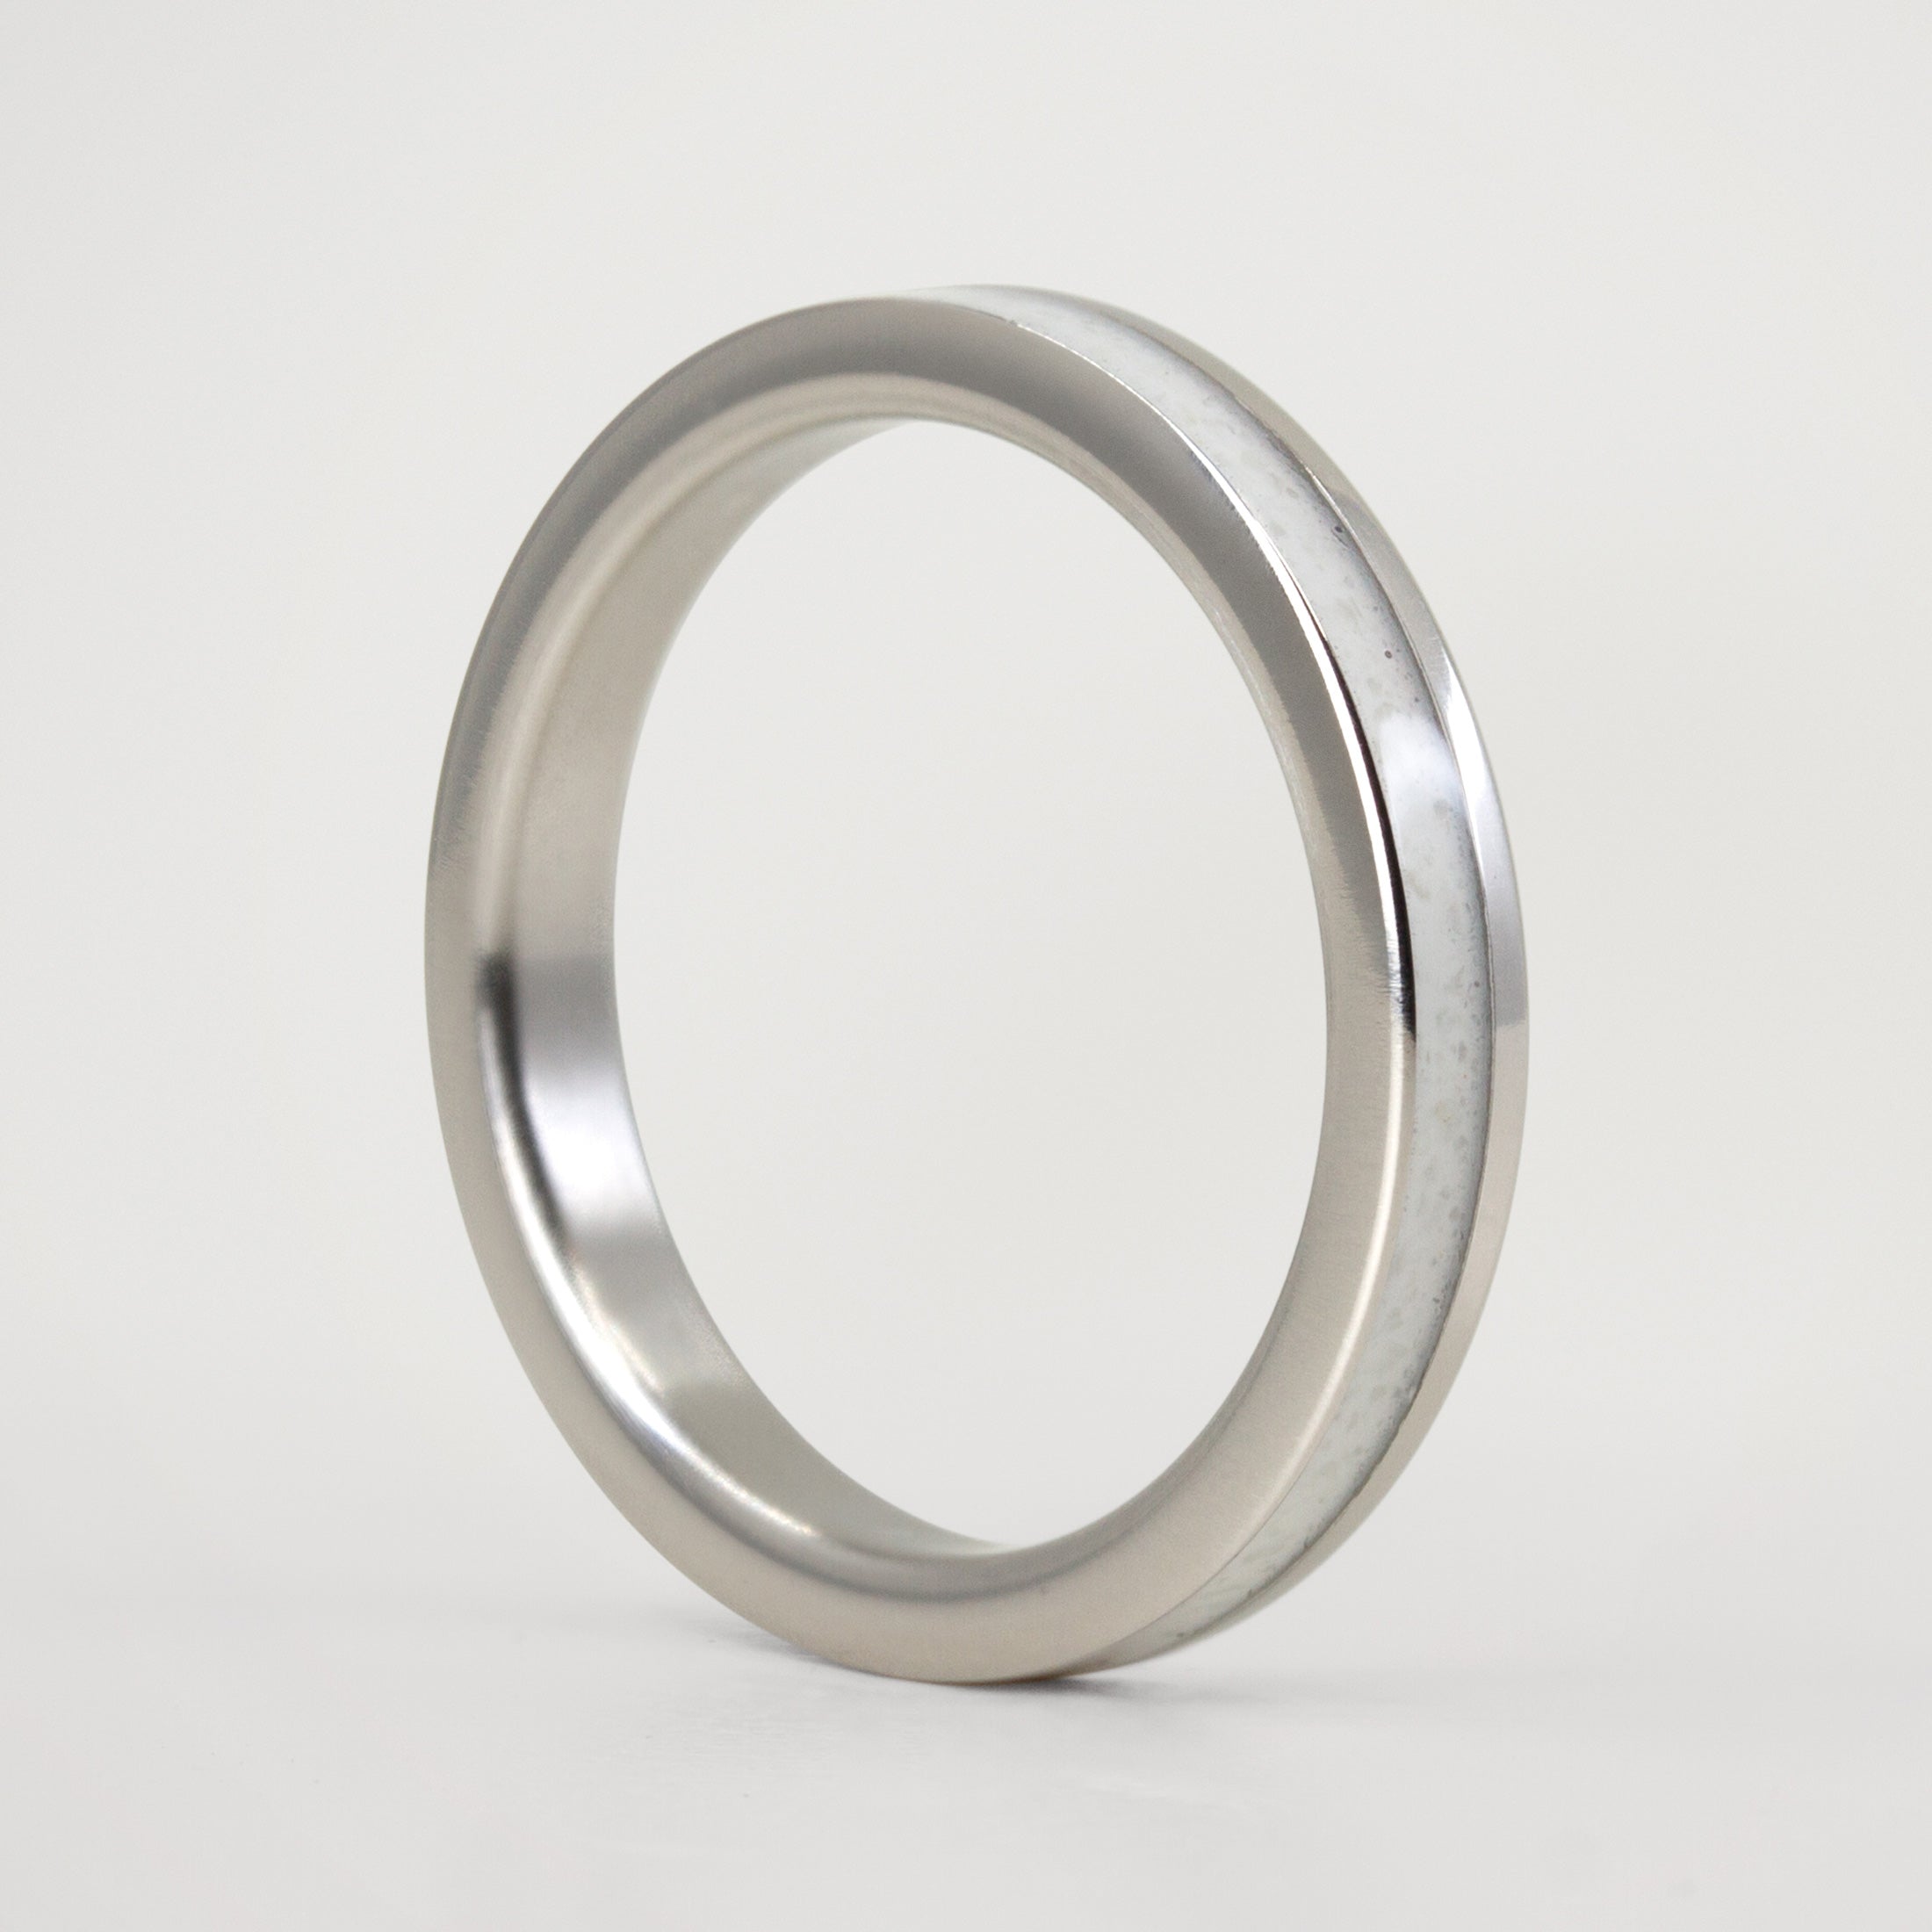 Carrara marble and offset polished titanium Ring